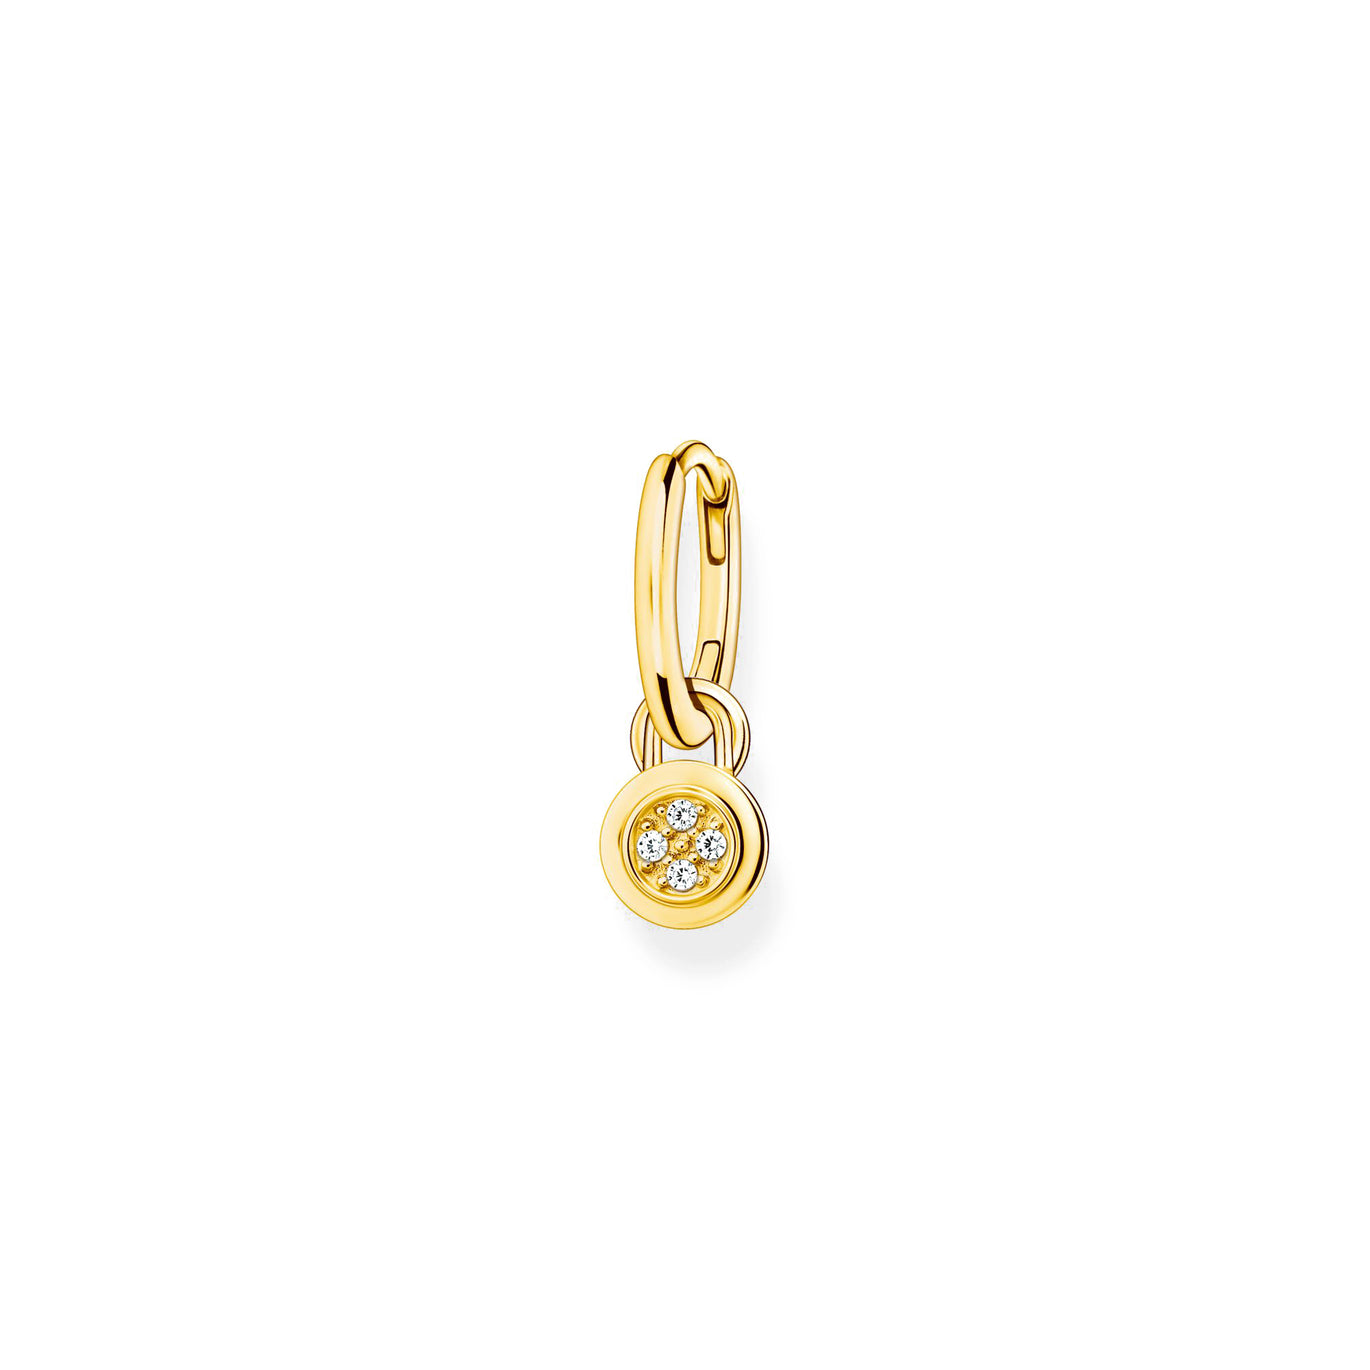 Thomas Sabo Single Gold Earring with Charm Carrier